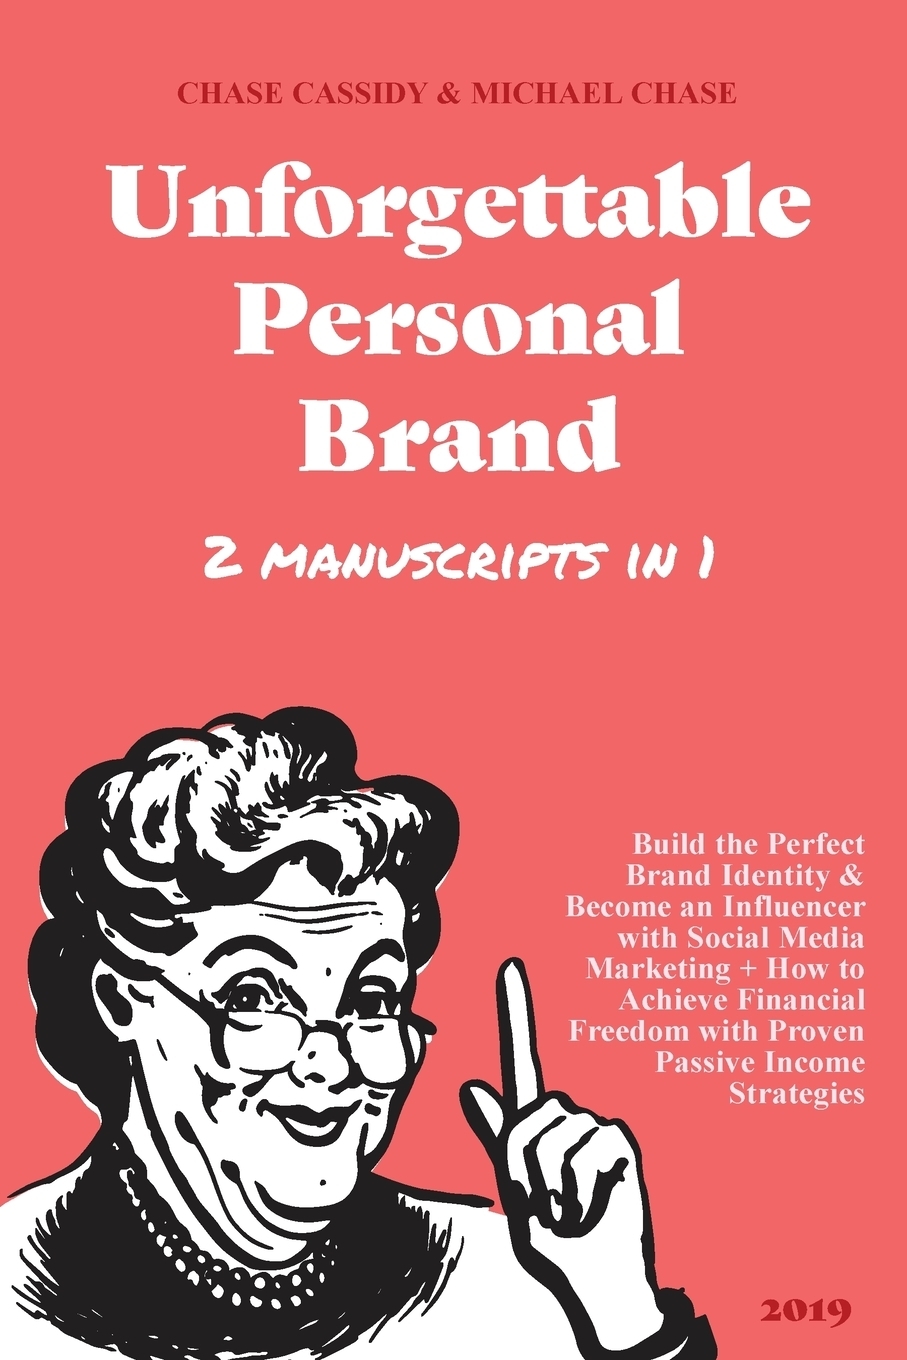 фото Unforgettable Personal Brand. (2 Books in 1) Build the Perfect Brand Identity & Become an Influencer with Social Media Marketing + How to Achieve Financial Freedom with Proven Passive Income Strategies